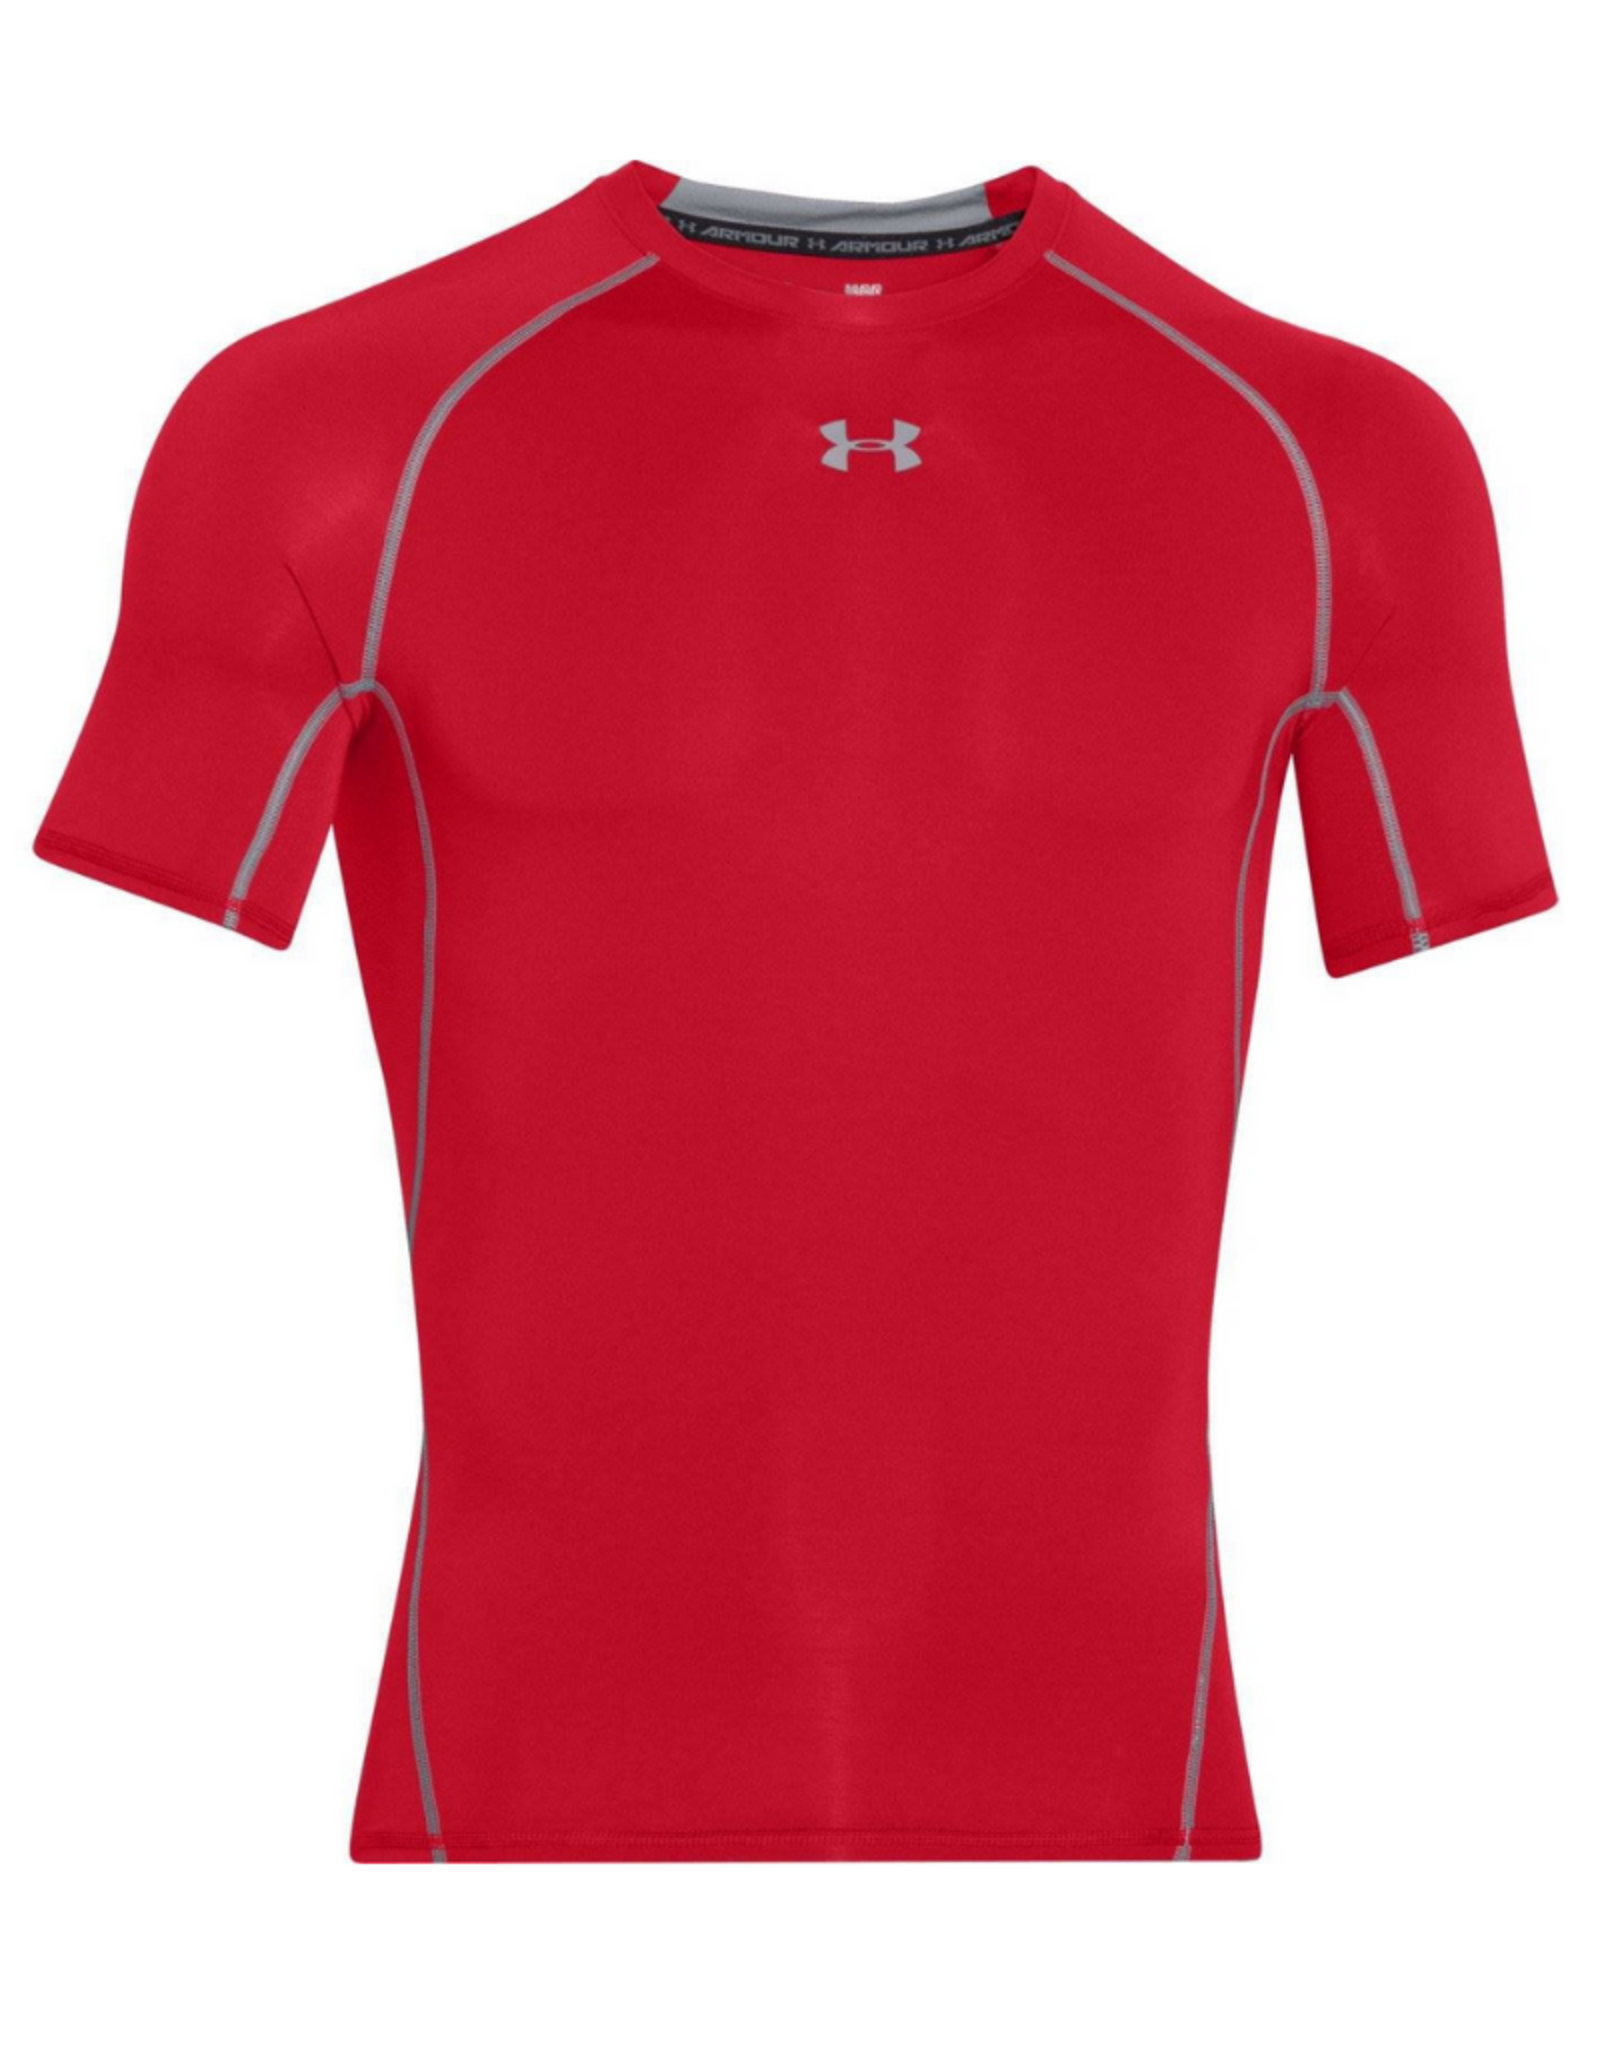 Under Armour Compression T-Shirt Red